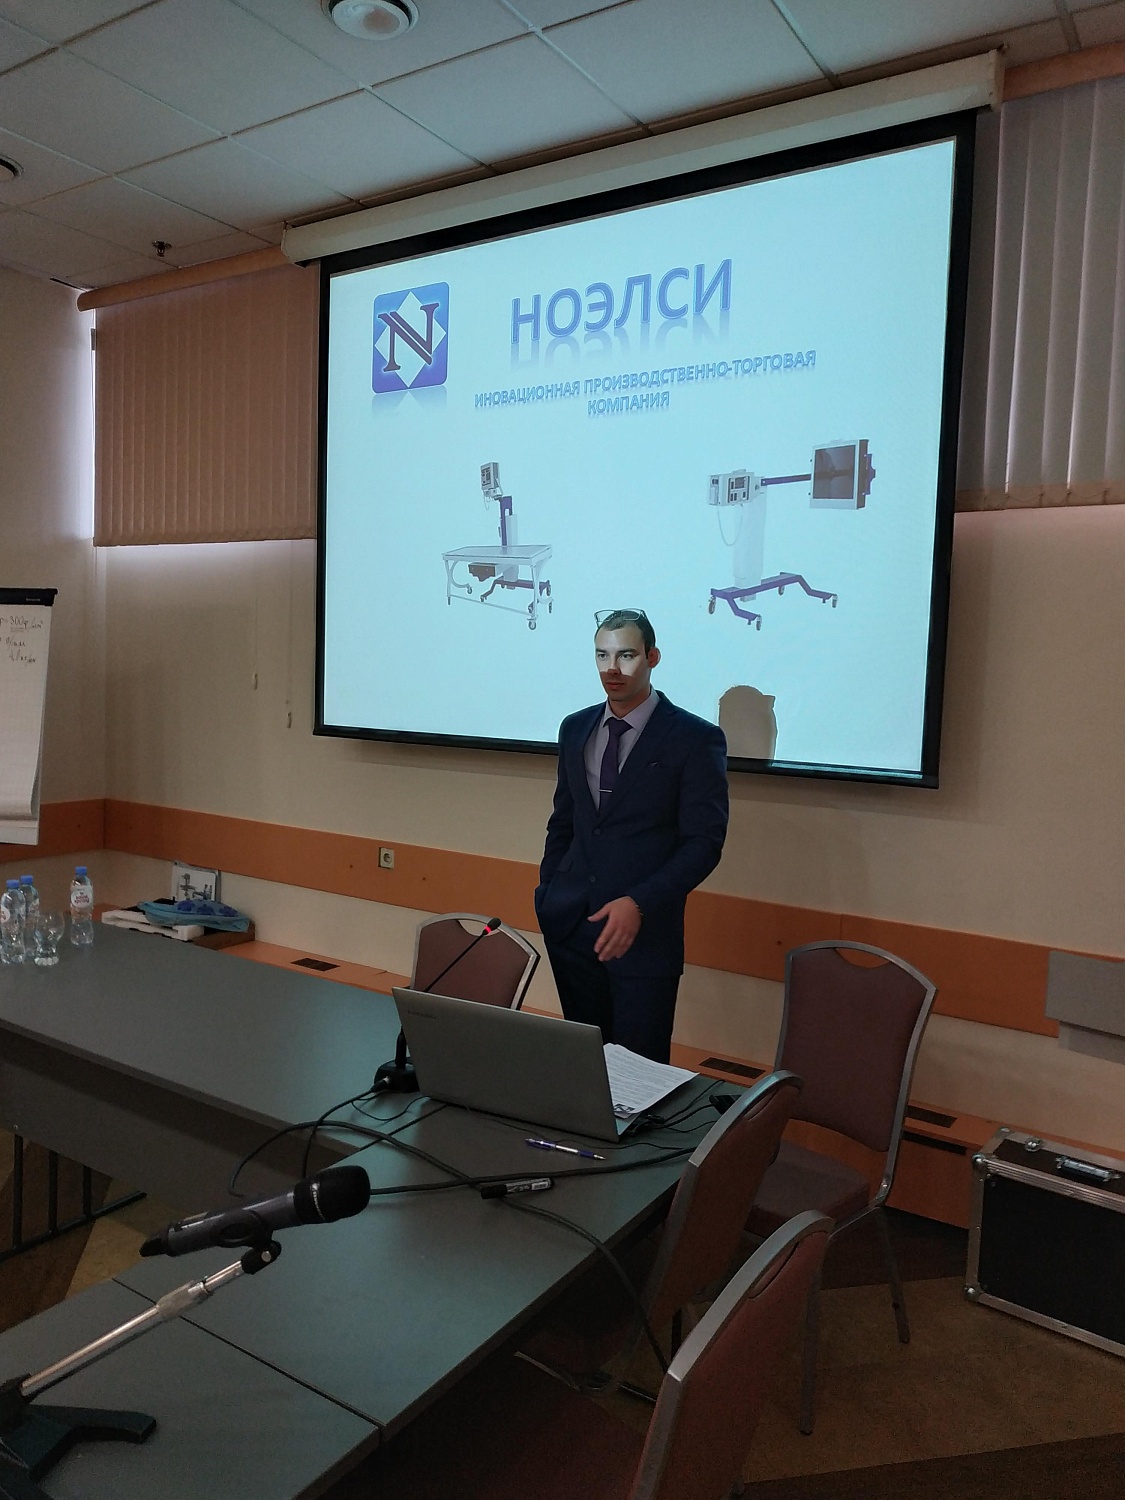 Scientific and Practical Conference of “NOELSI” Company’s Distributors